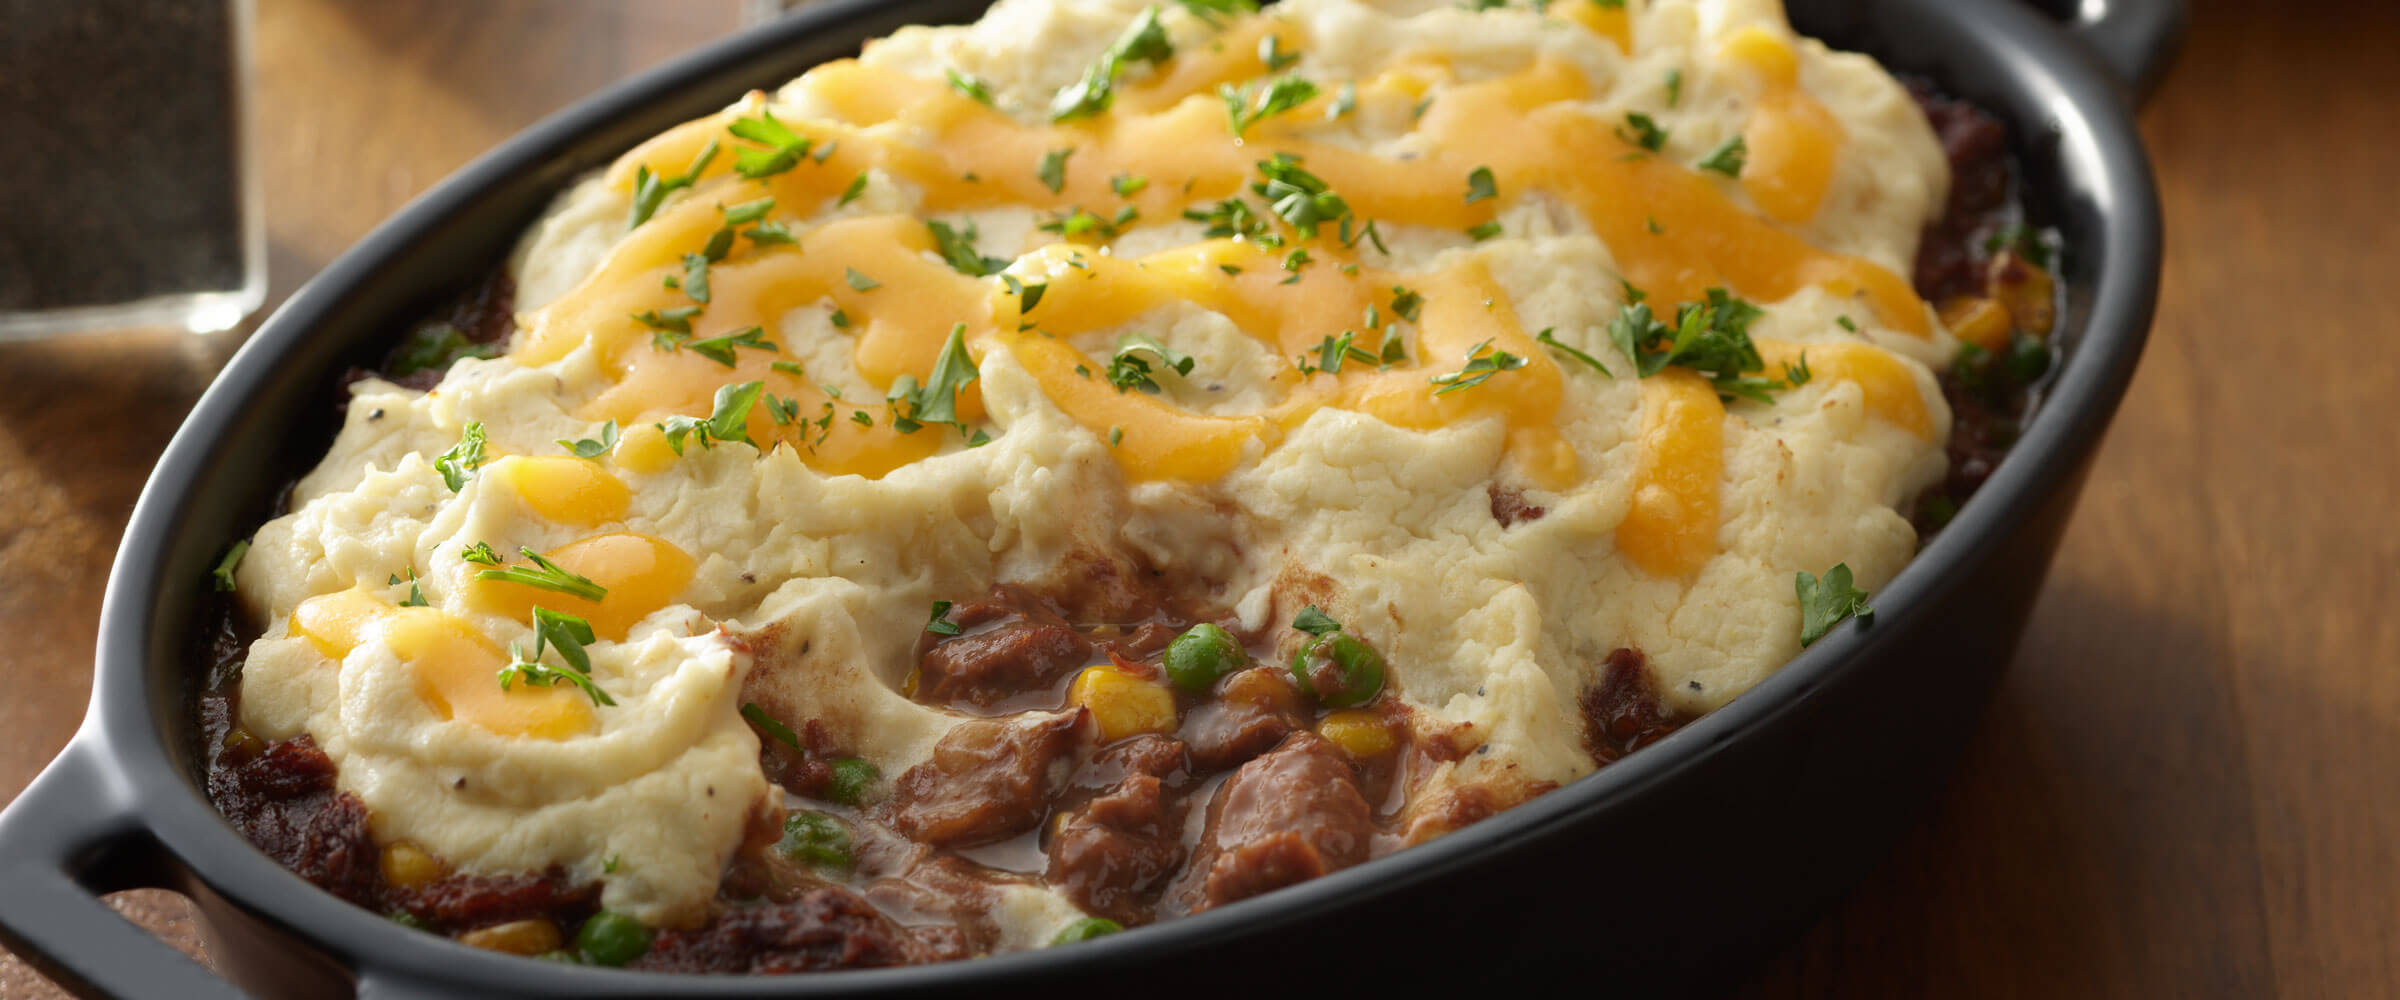 Shepherd’s Pie in cast iron skillet topped with cheese